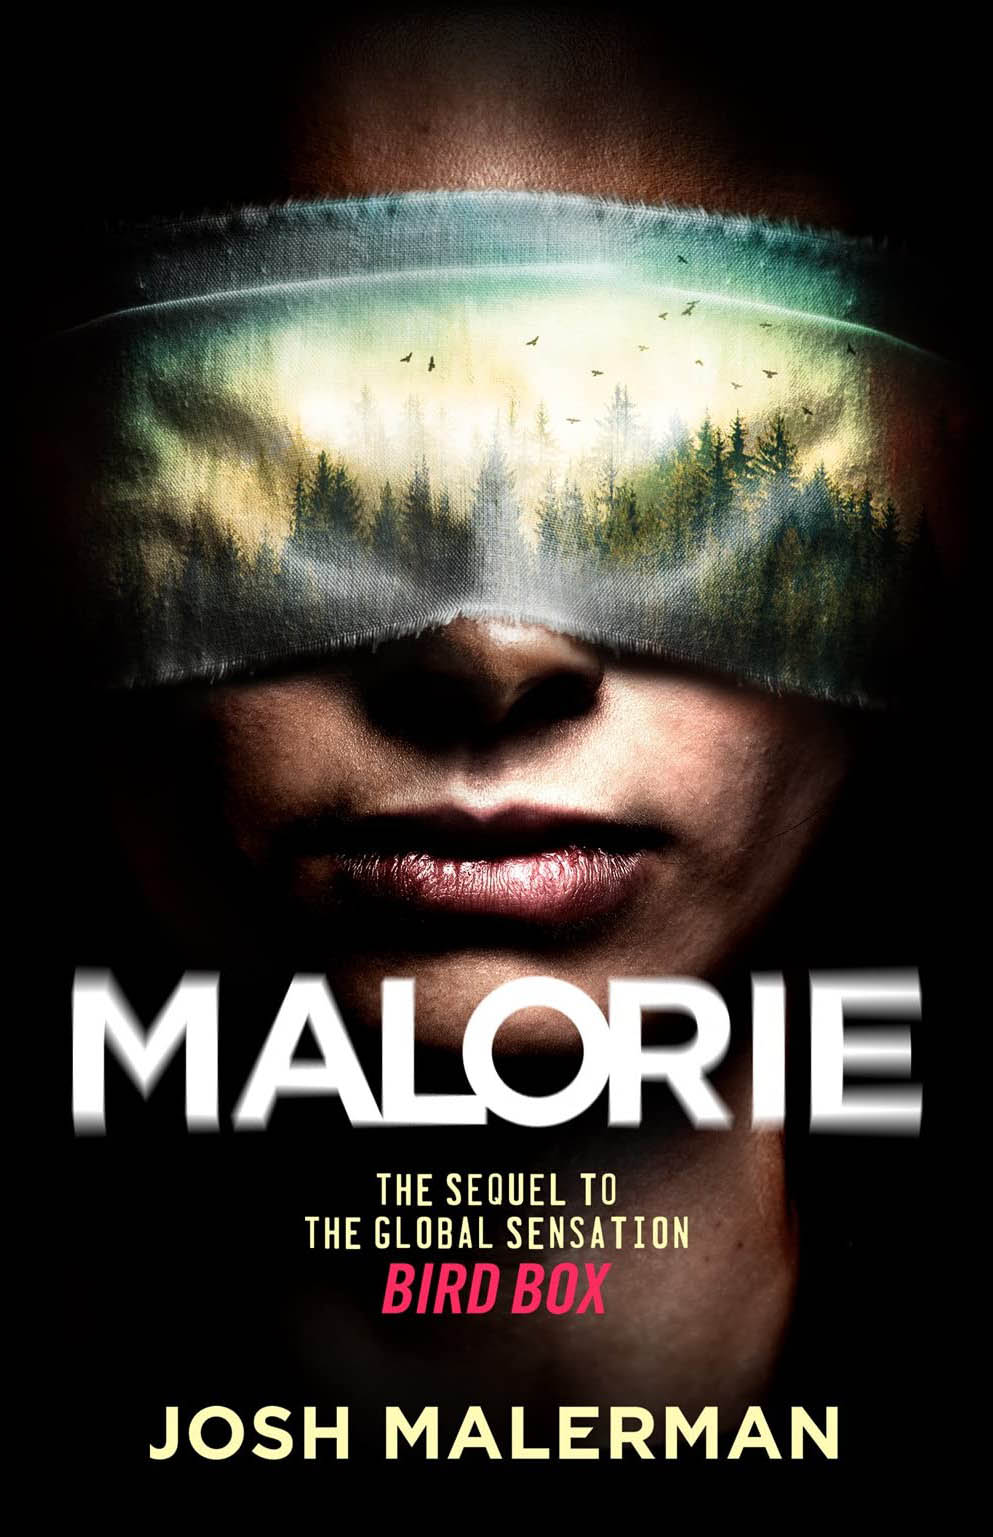 Malorie: A Bird Box Novel Special Edition by Josh Malerman Coming Q4 2020 from Dark Regions Press - Limited-Time Special!